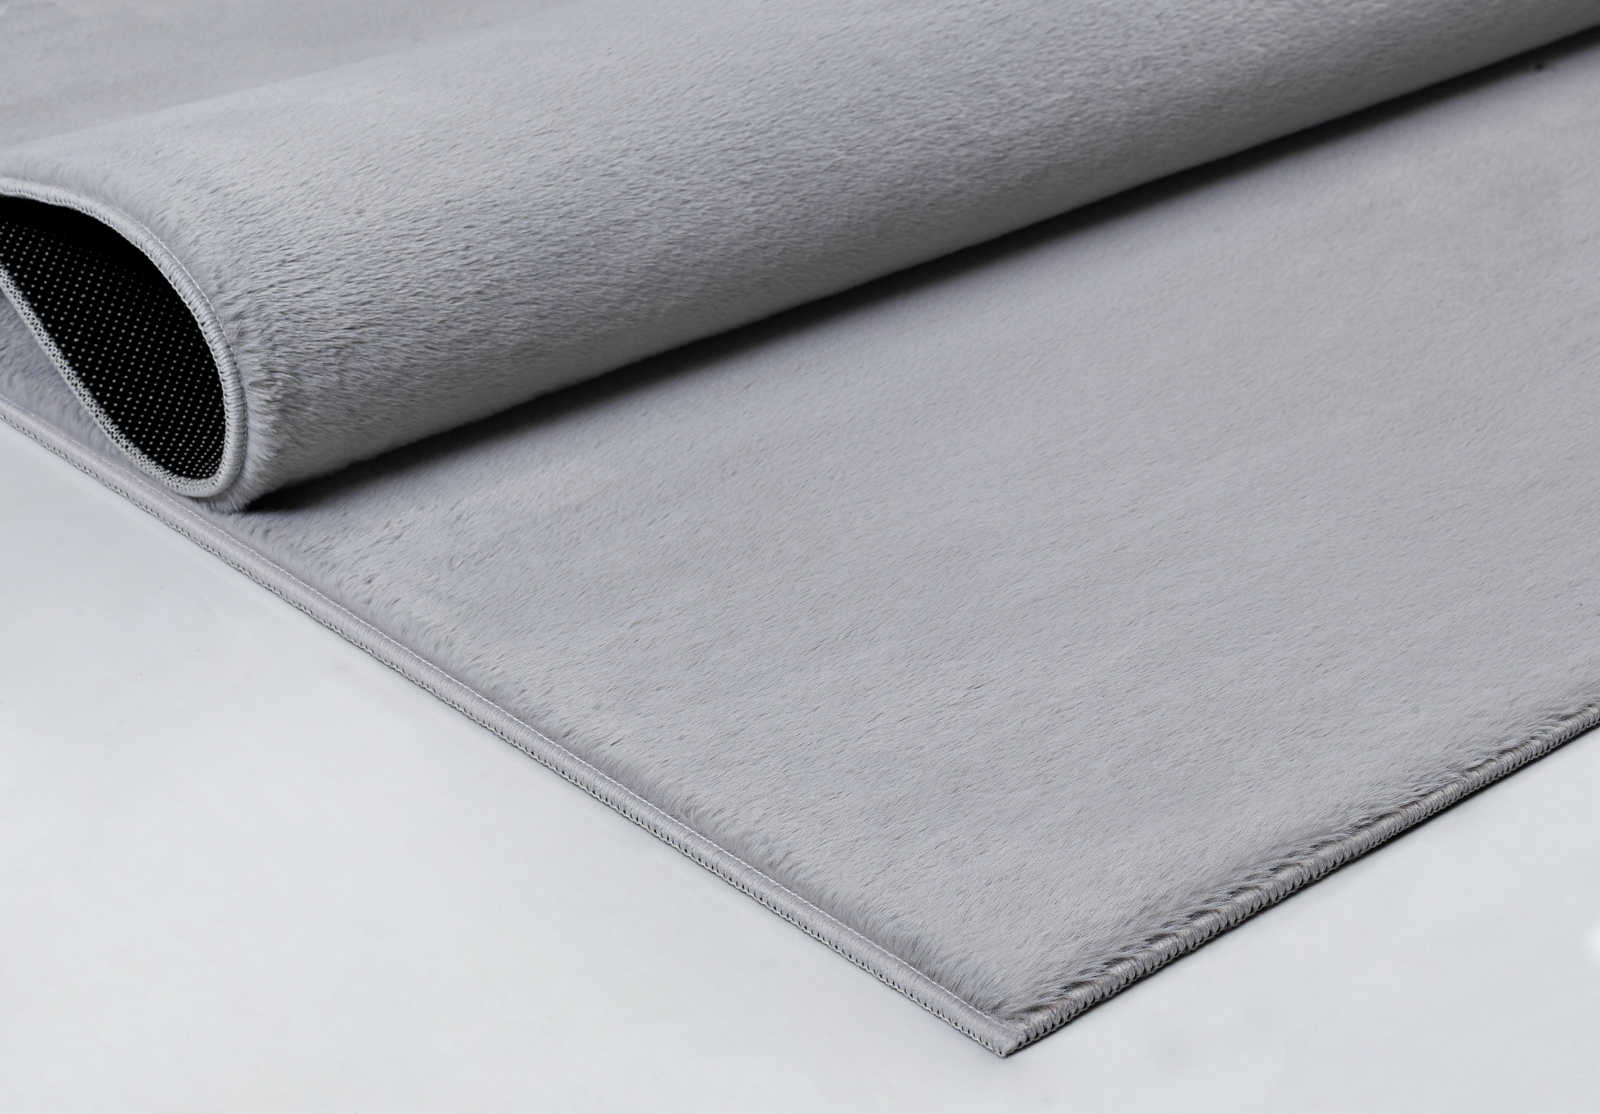             Comfortable high pile carpet in soft grey - 220 x 160 cm
        